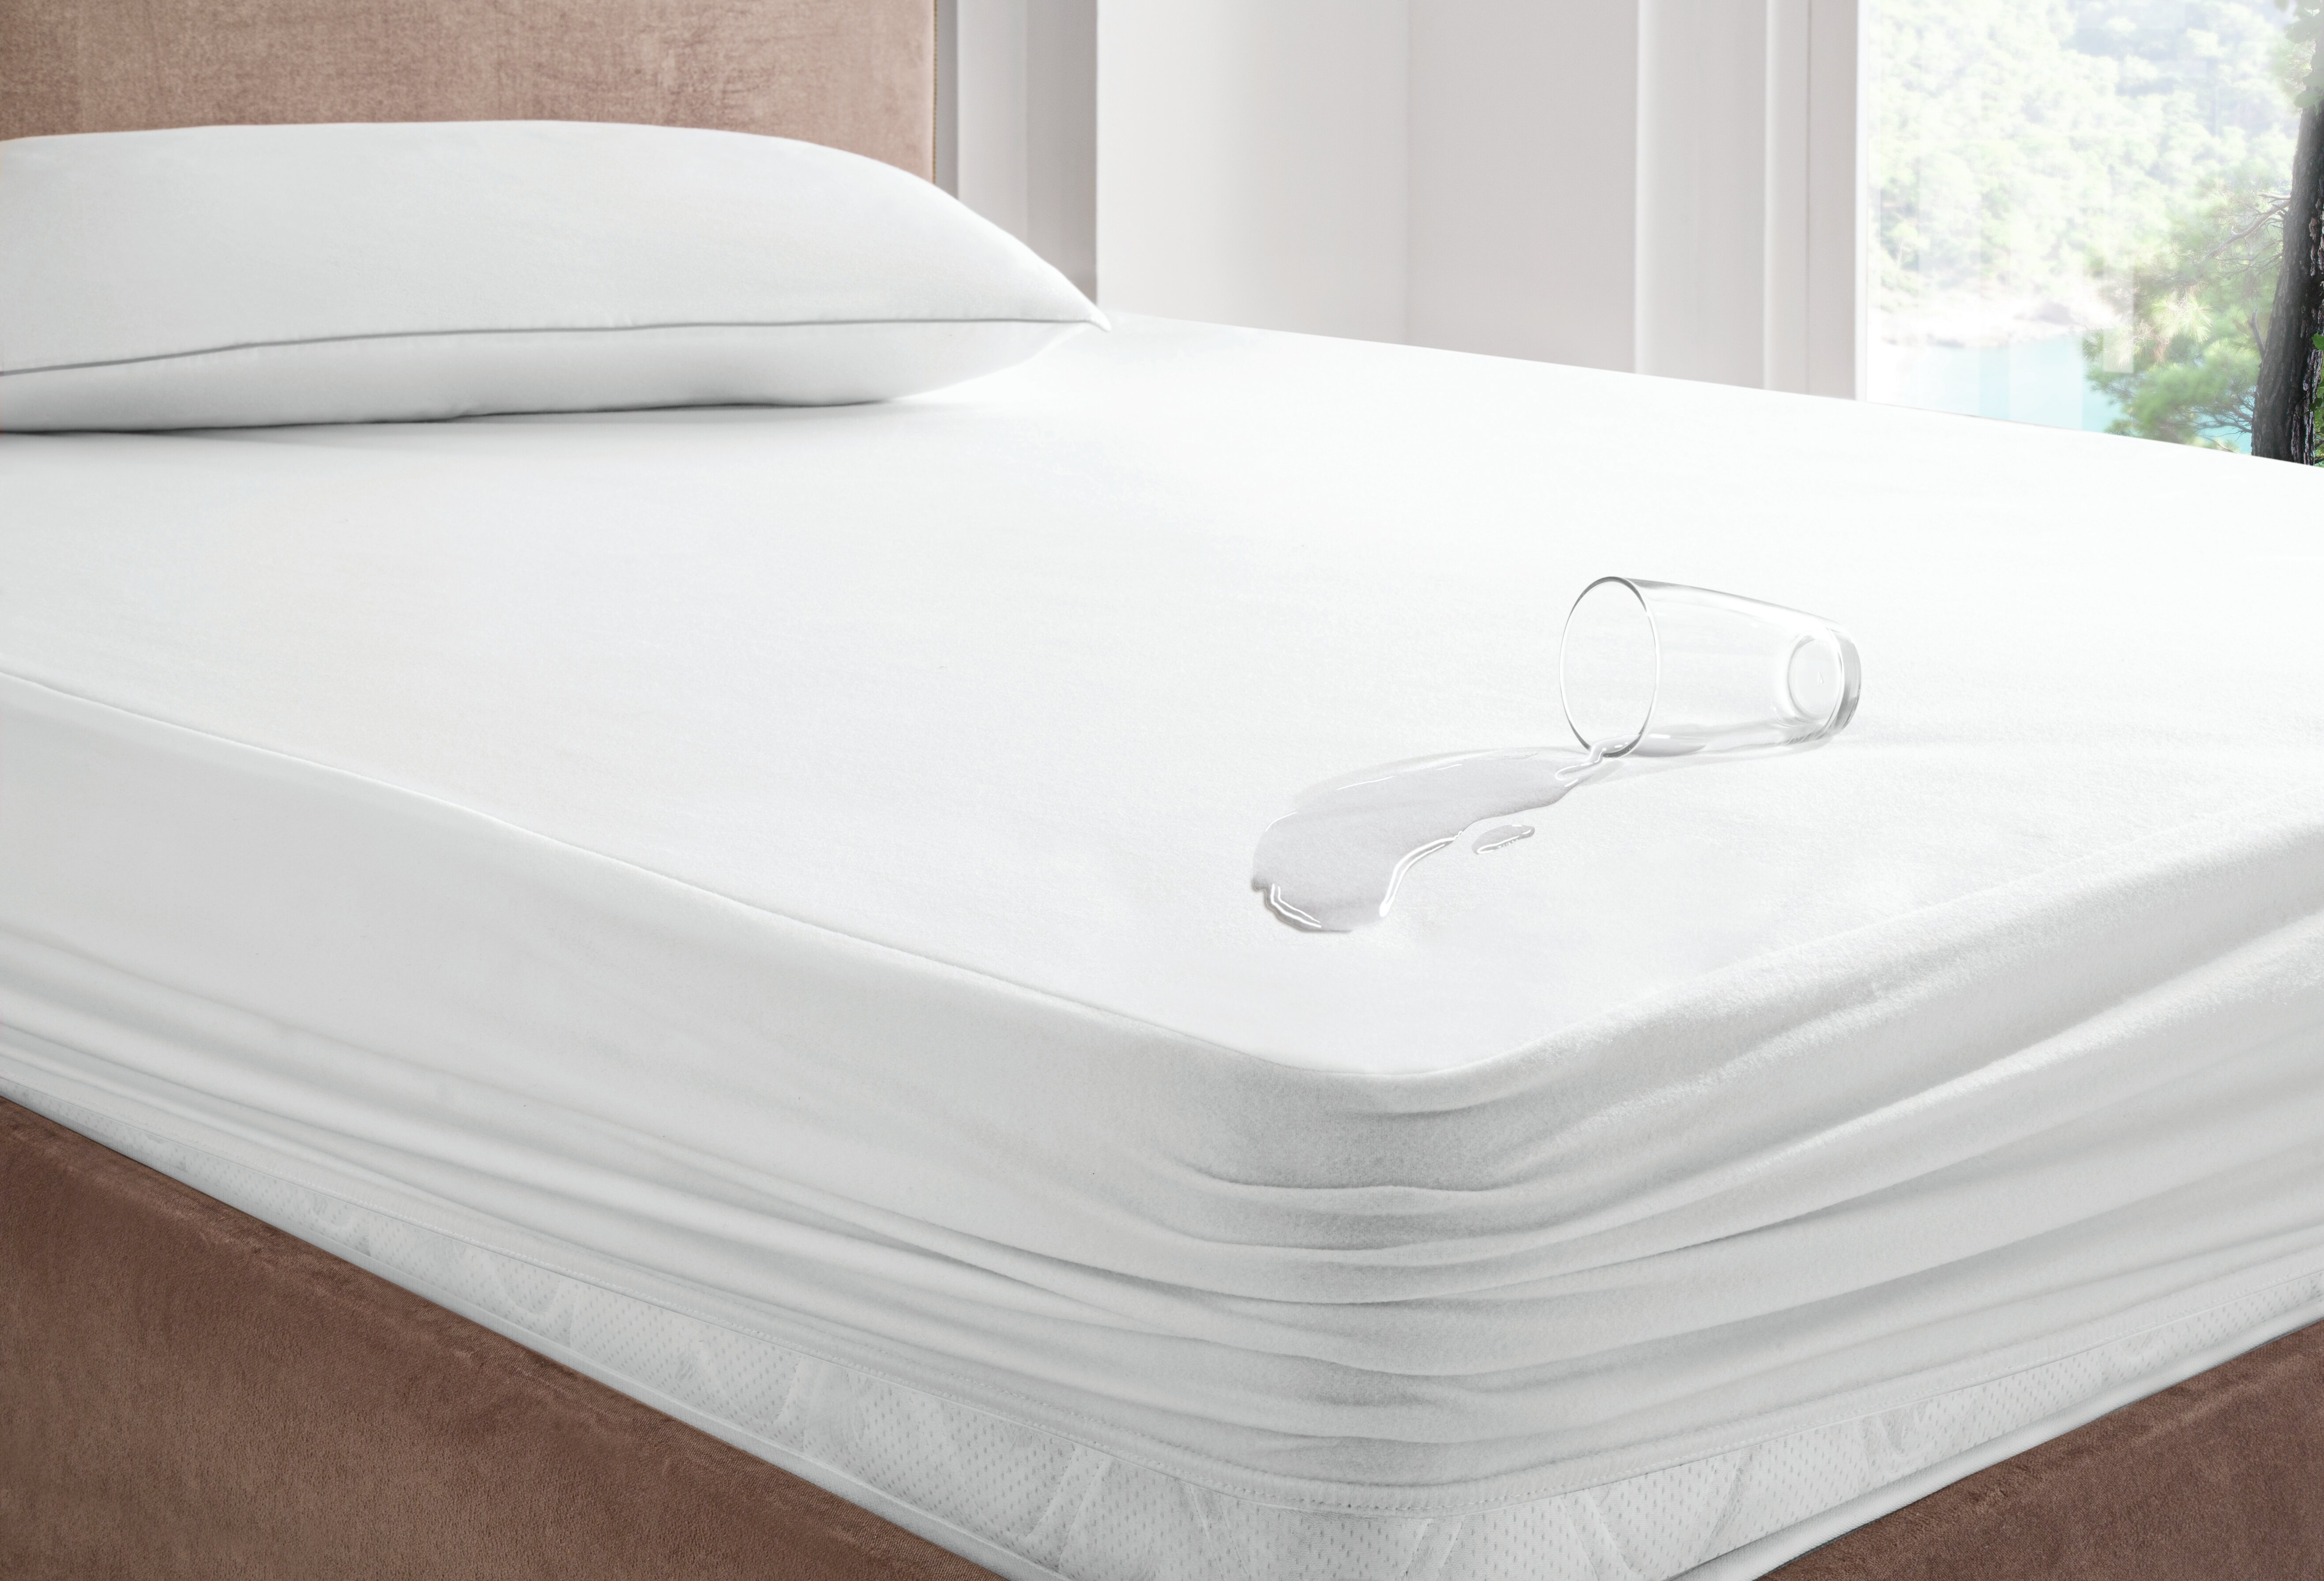 Mattress Protector King Size Waterproof Hypoallergenic Fitted Cover Soft Cotton 